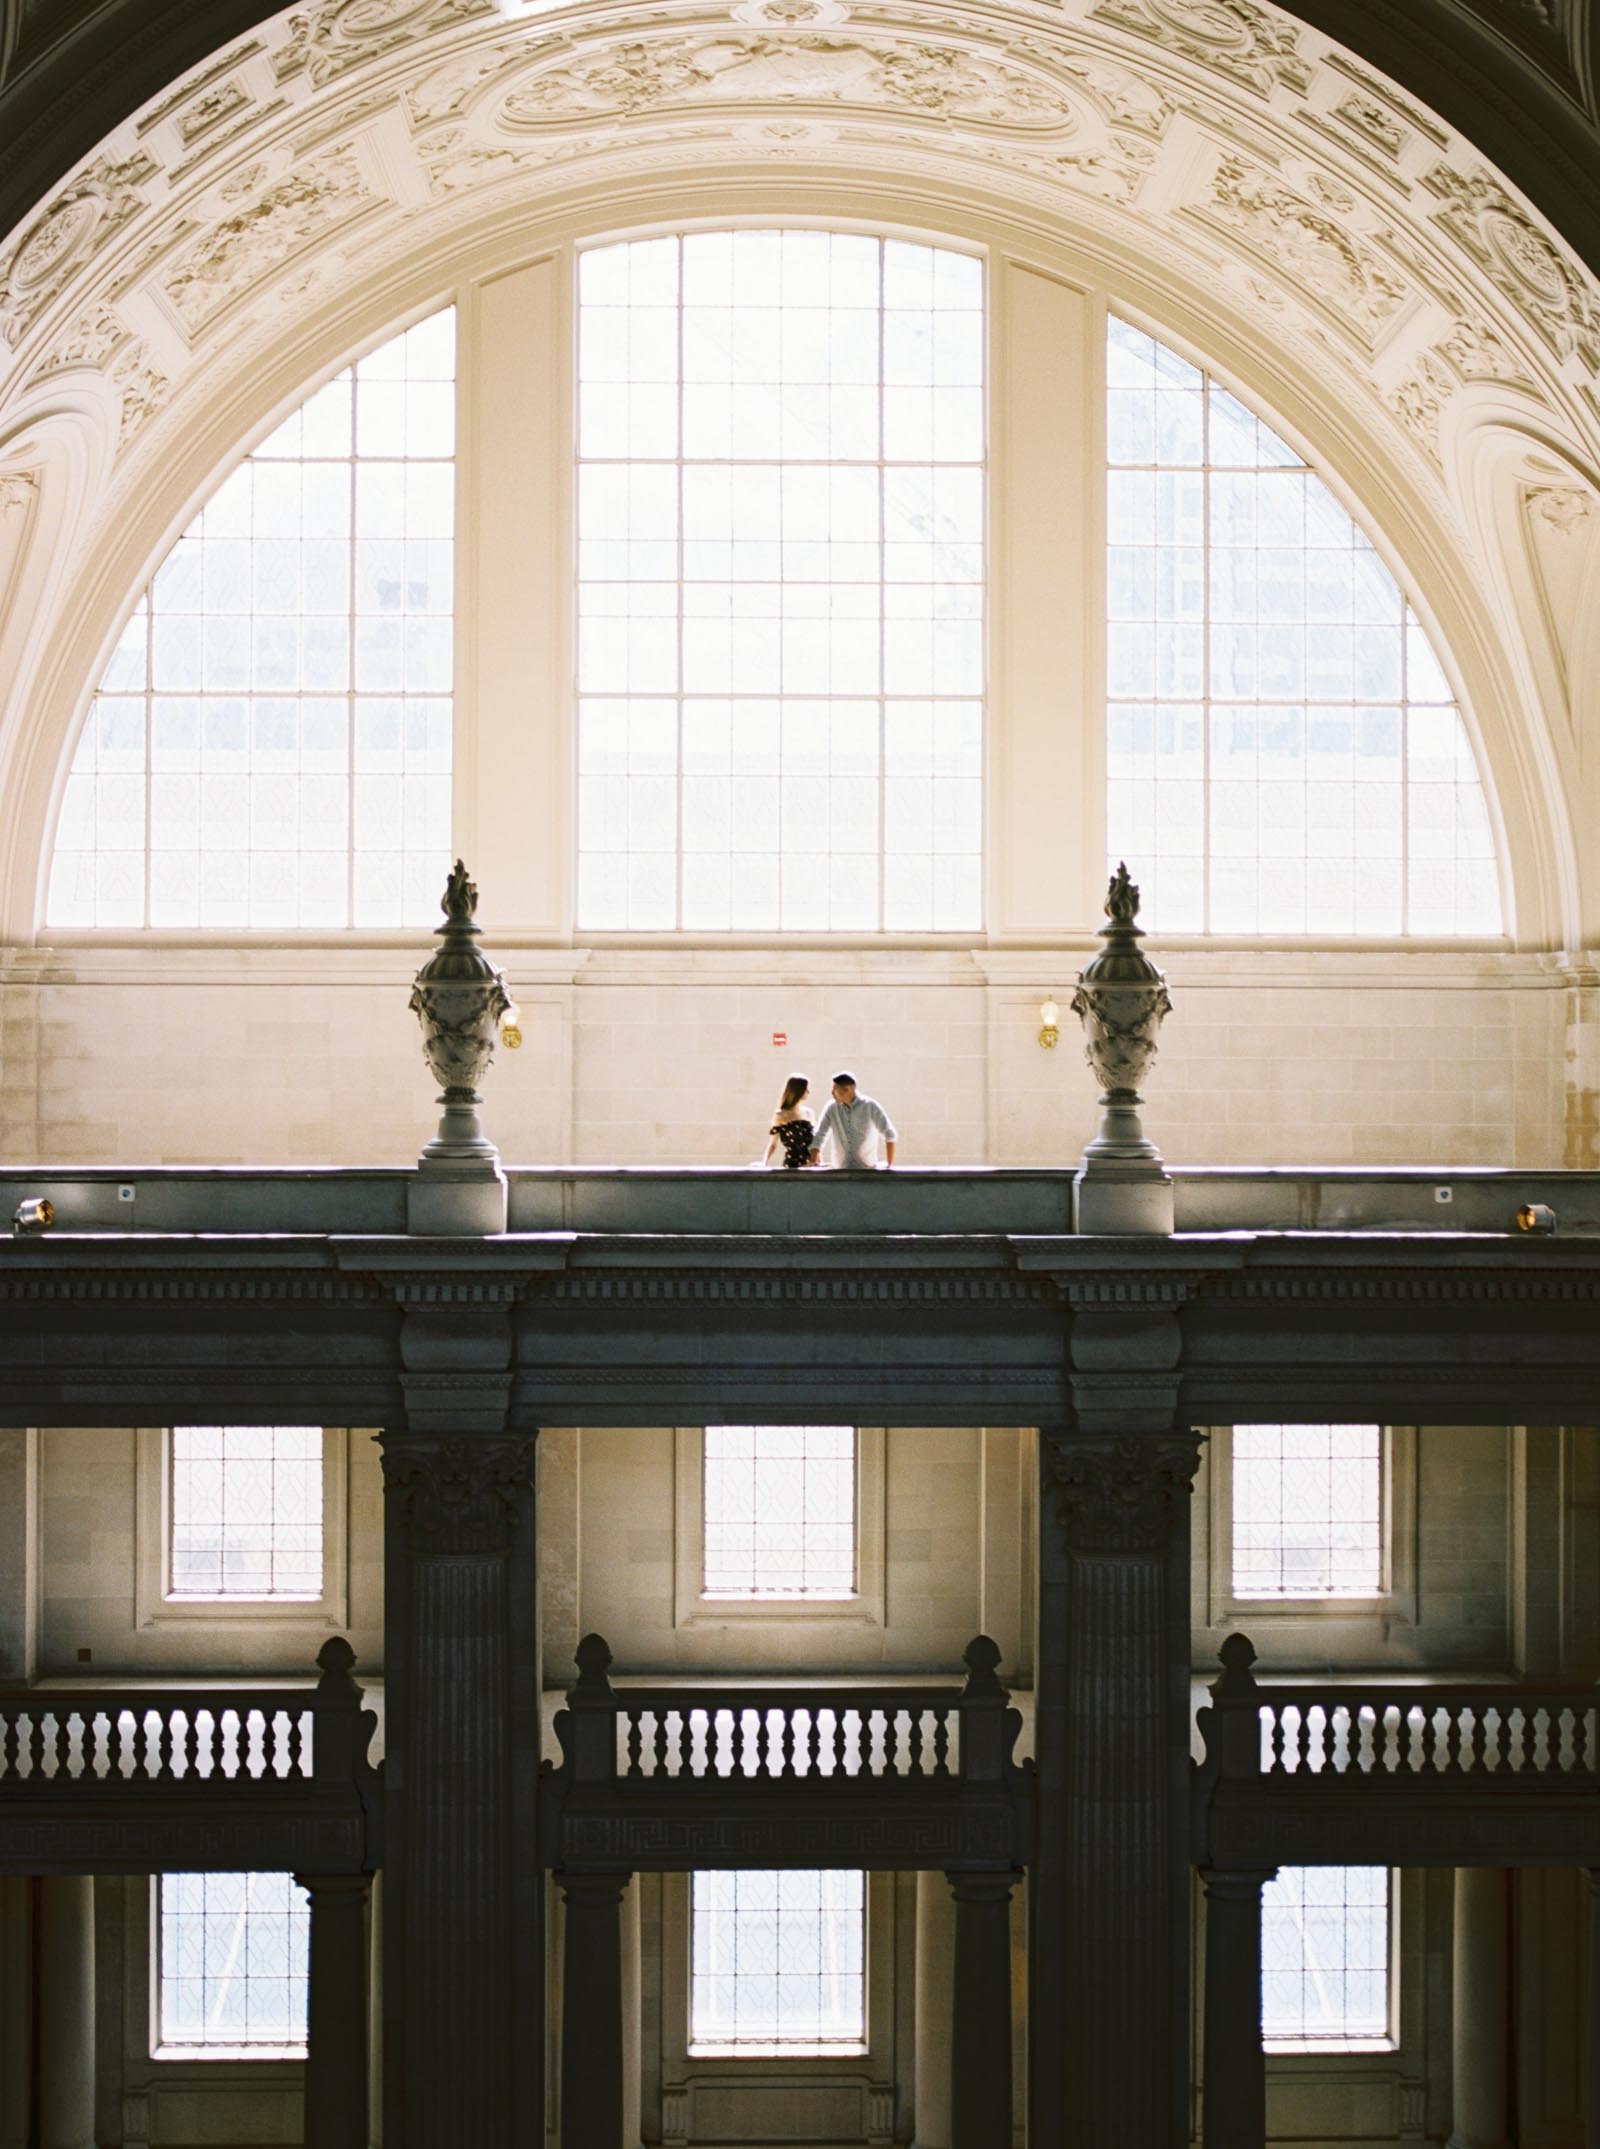 San Francisco Wedding Photographers | City Hall Engagement Session | Married Morenos